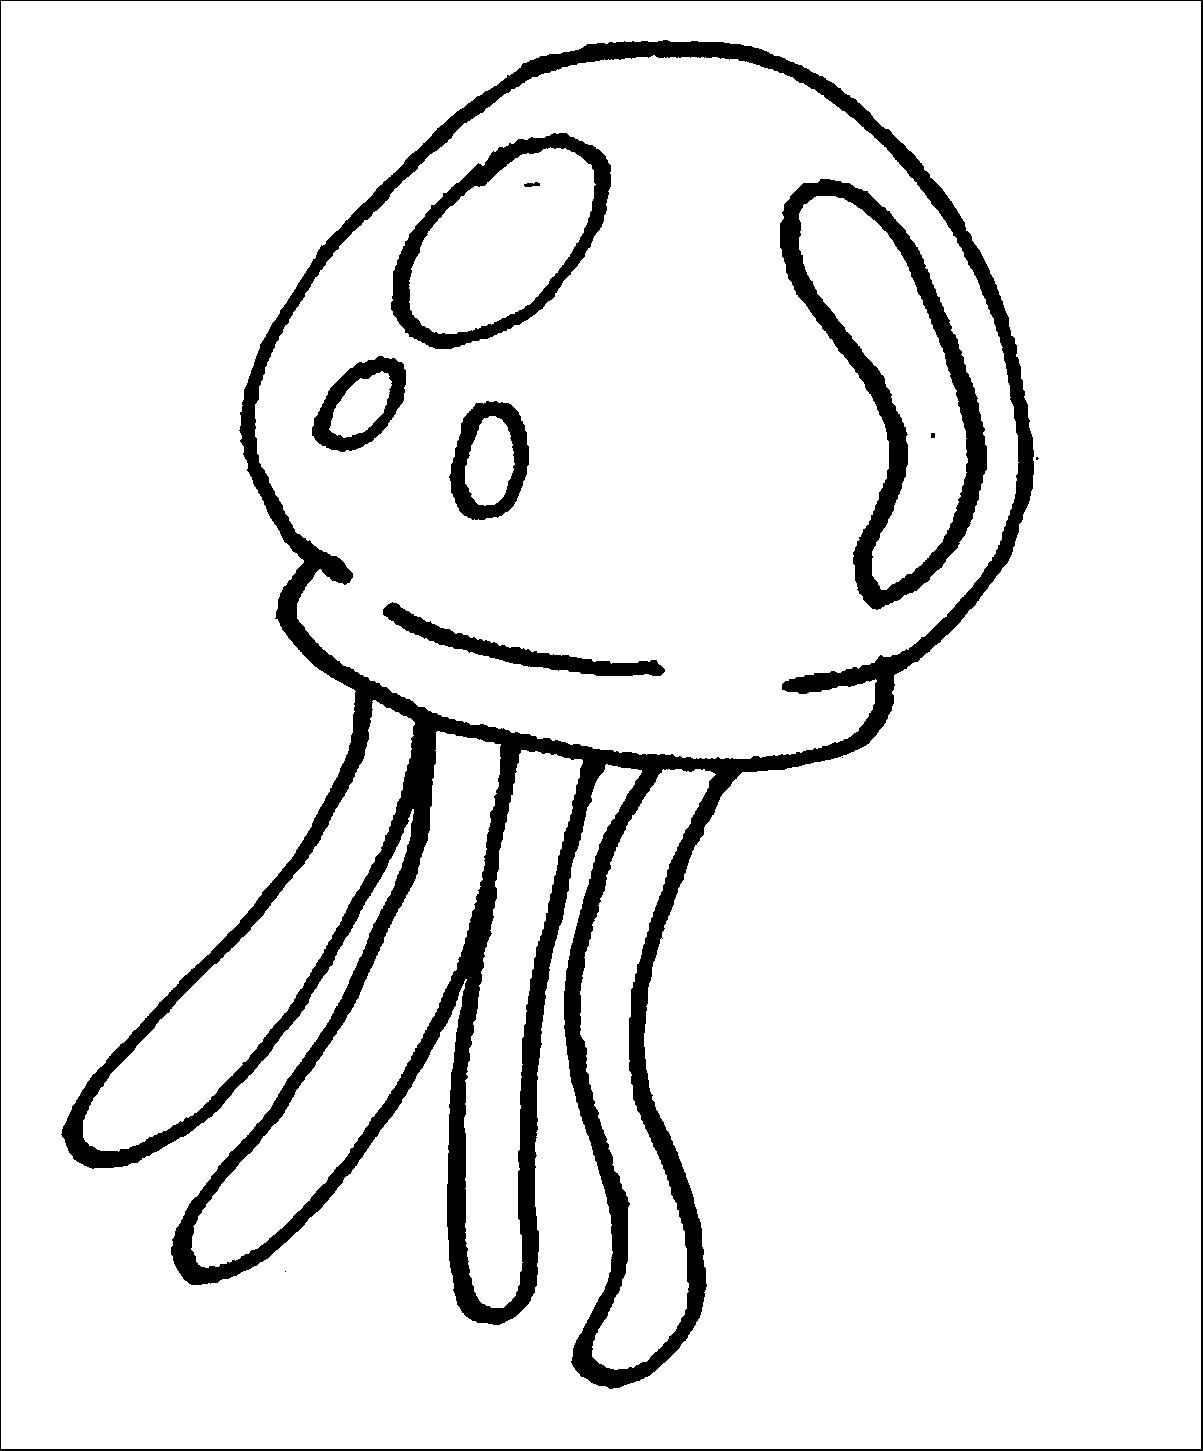 spongebob-jellyfish-coloring-pages-of-spongebob-jellyfish-coloring-pages Spongebob Jellyfish Coloring Pages Cartoon 